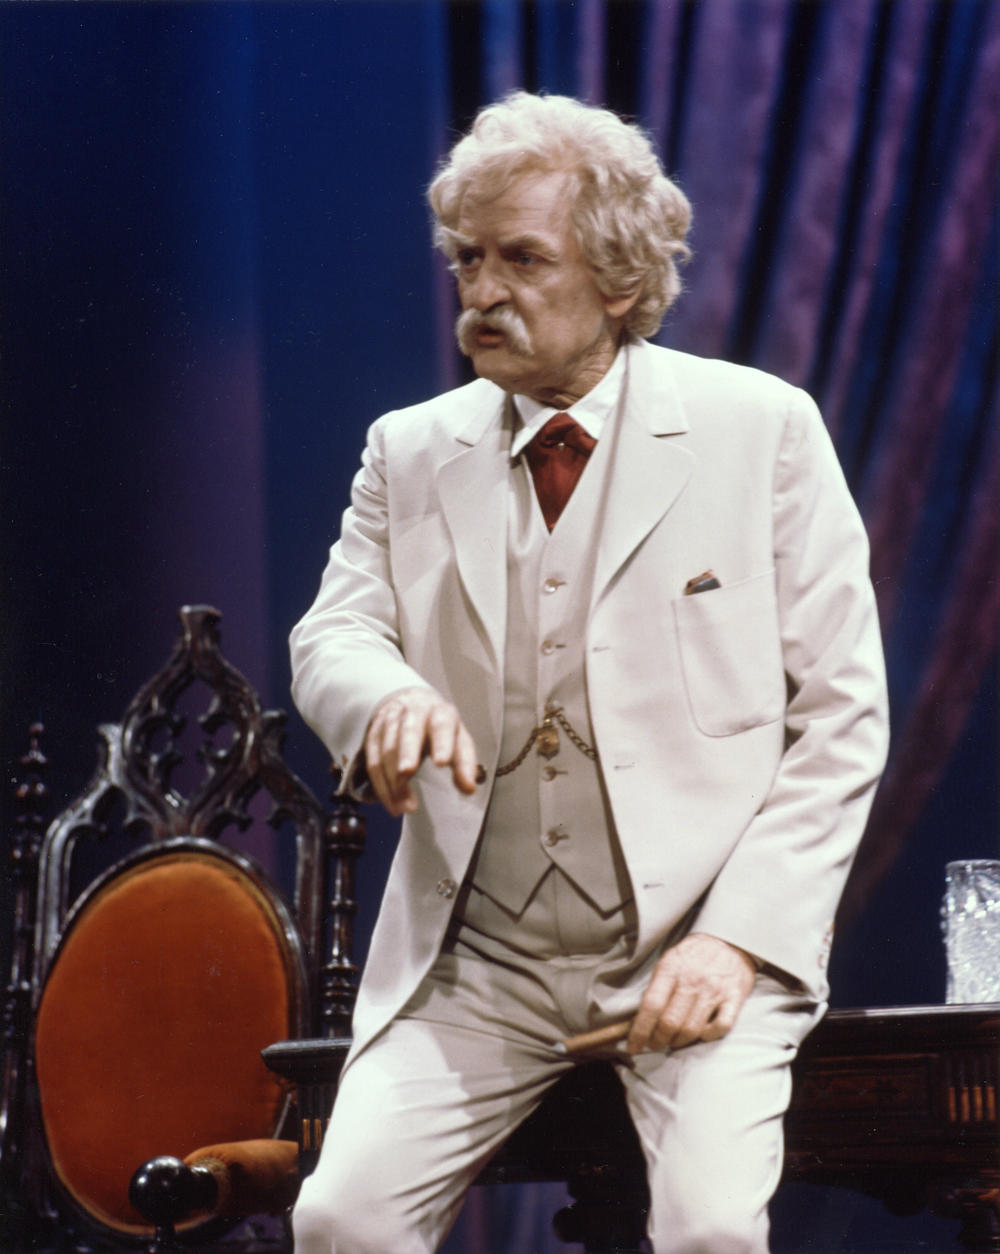 Holbrook performed his one-man show <em>Mark Twain Tonight </em>for decades. He loved it, but in 2011, he told NPR's Neal Conan that it took him a long time to break out of that role. 